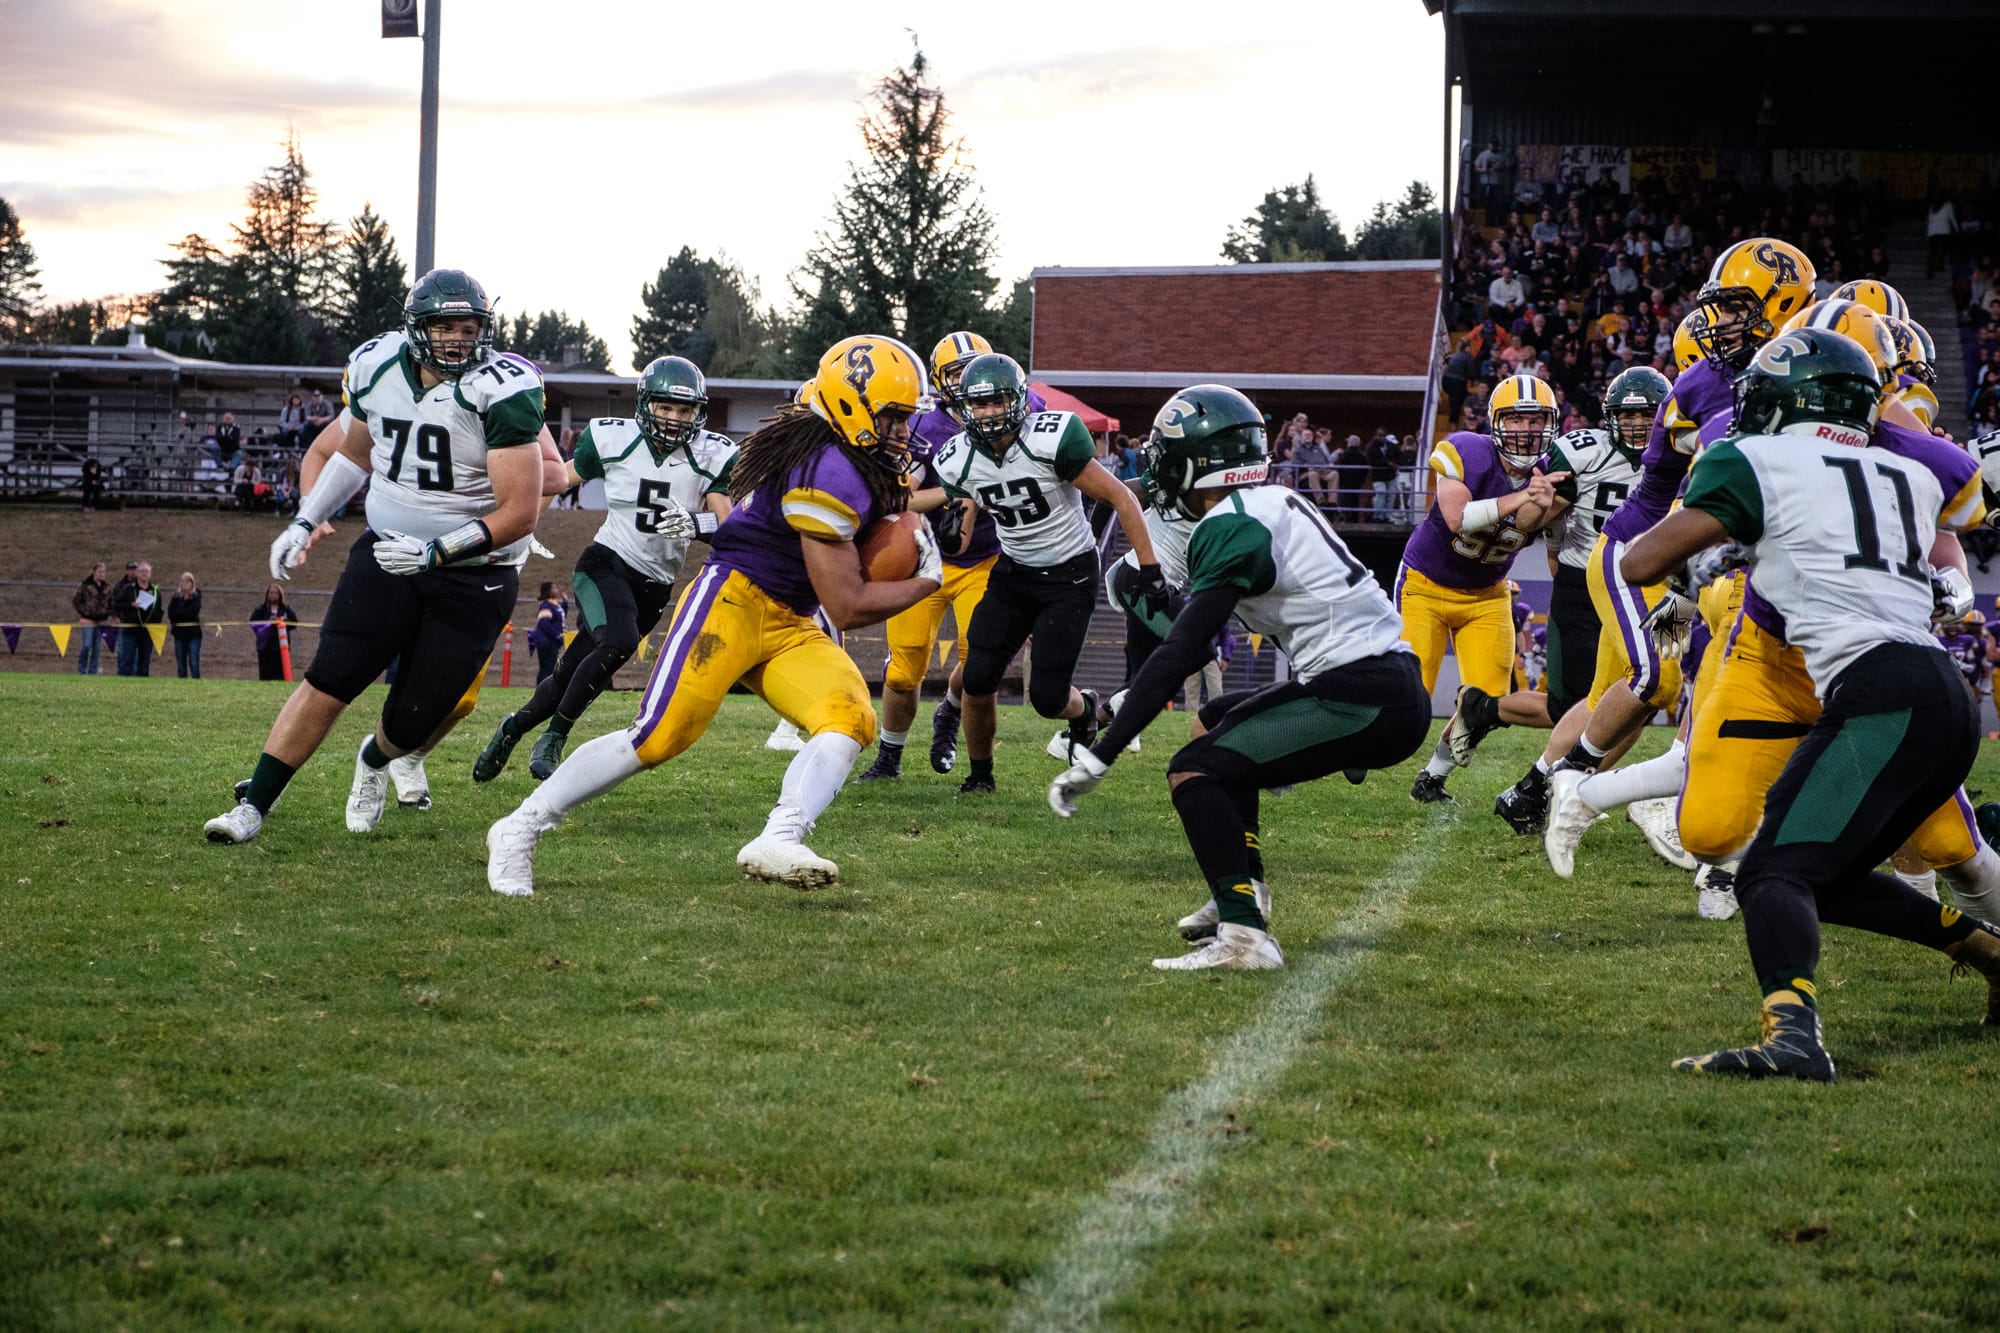 The Columbia River Chieftans move the football up the field against the Evergreen Plainsman Friday night, September 2, 2016.